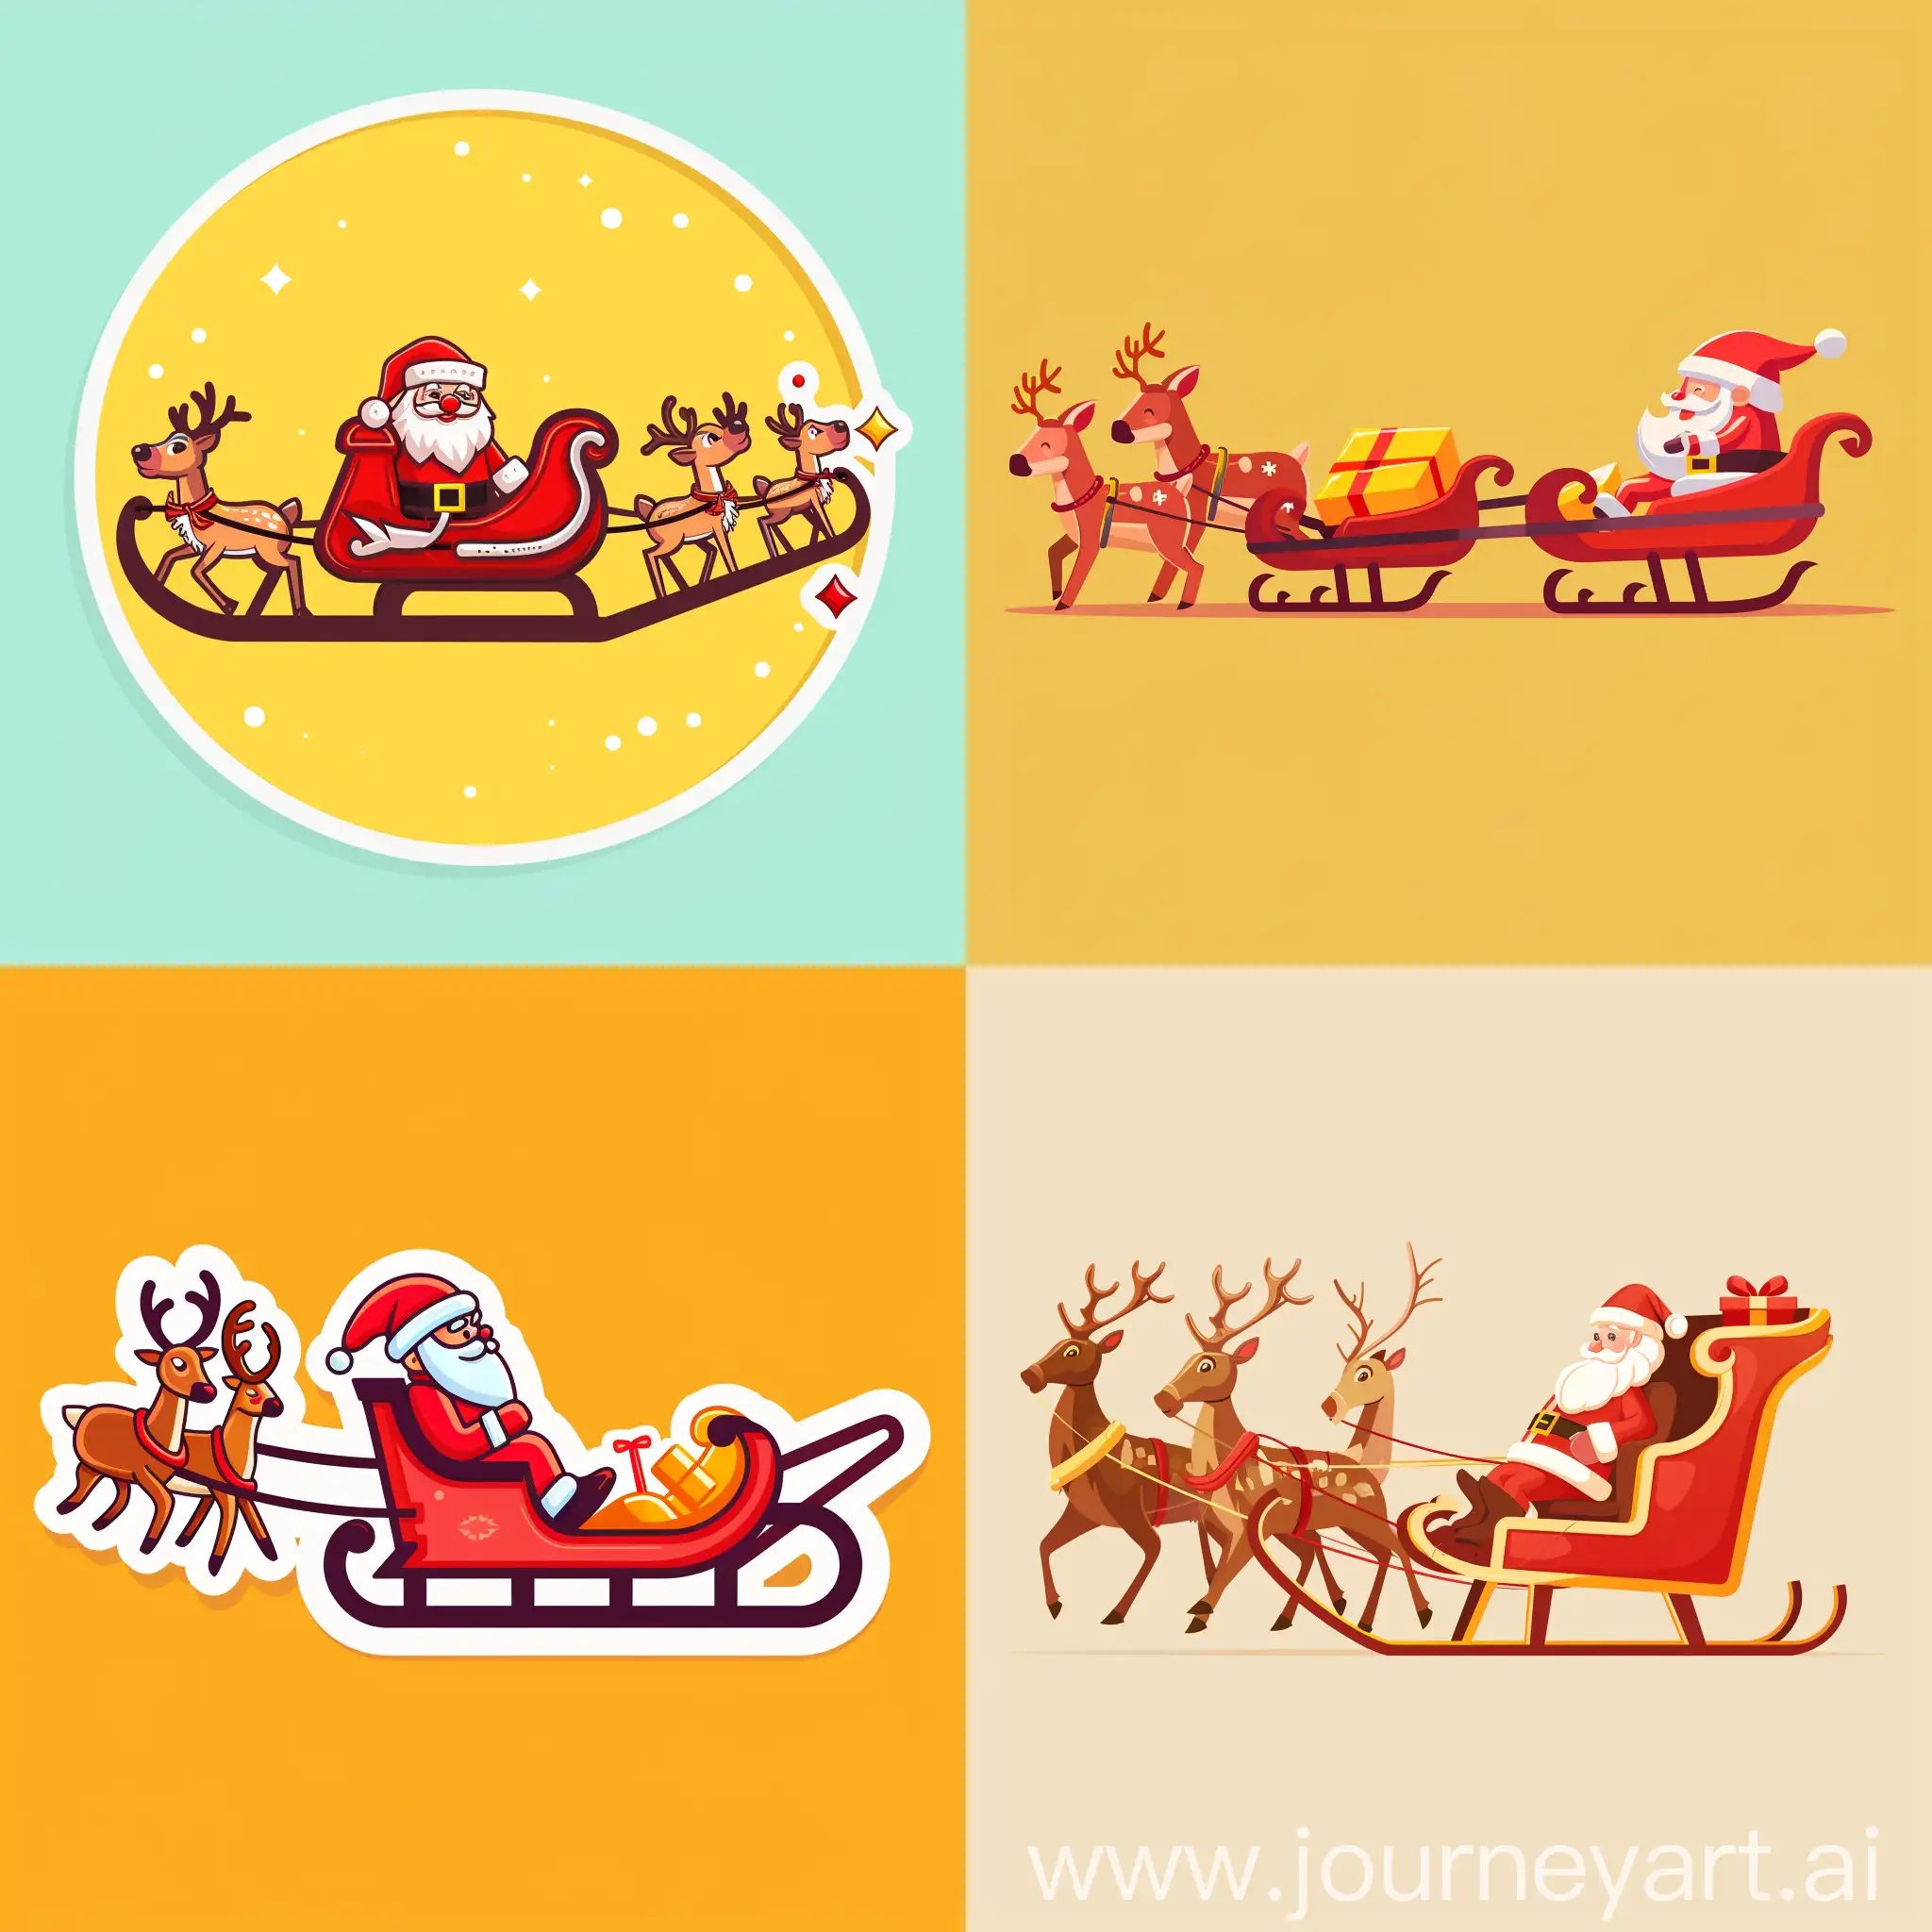 Santas-Sled-with-Reindeer-Festive-Cartoon-Sticker-in-HighQuality-Flat-Style